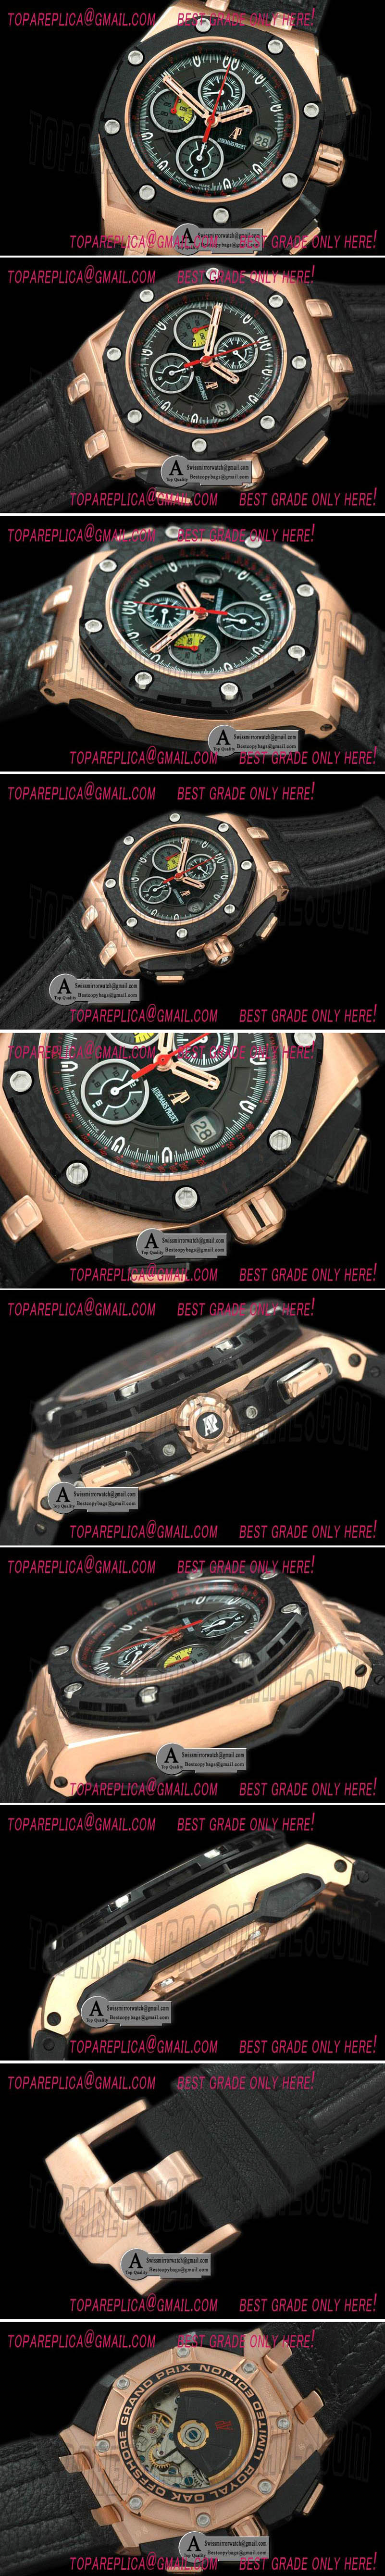 Audemars Piguet 26290RO.OO.A001VE.01 Grand Prix Rose Gold/Carbon/Leather Grey A-7750 Replica Watches